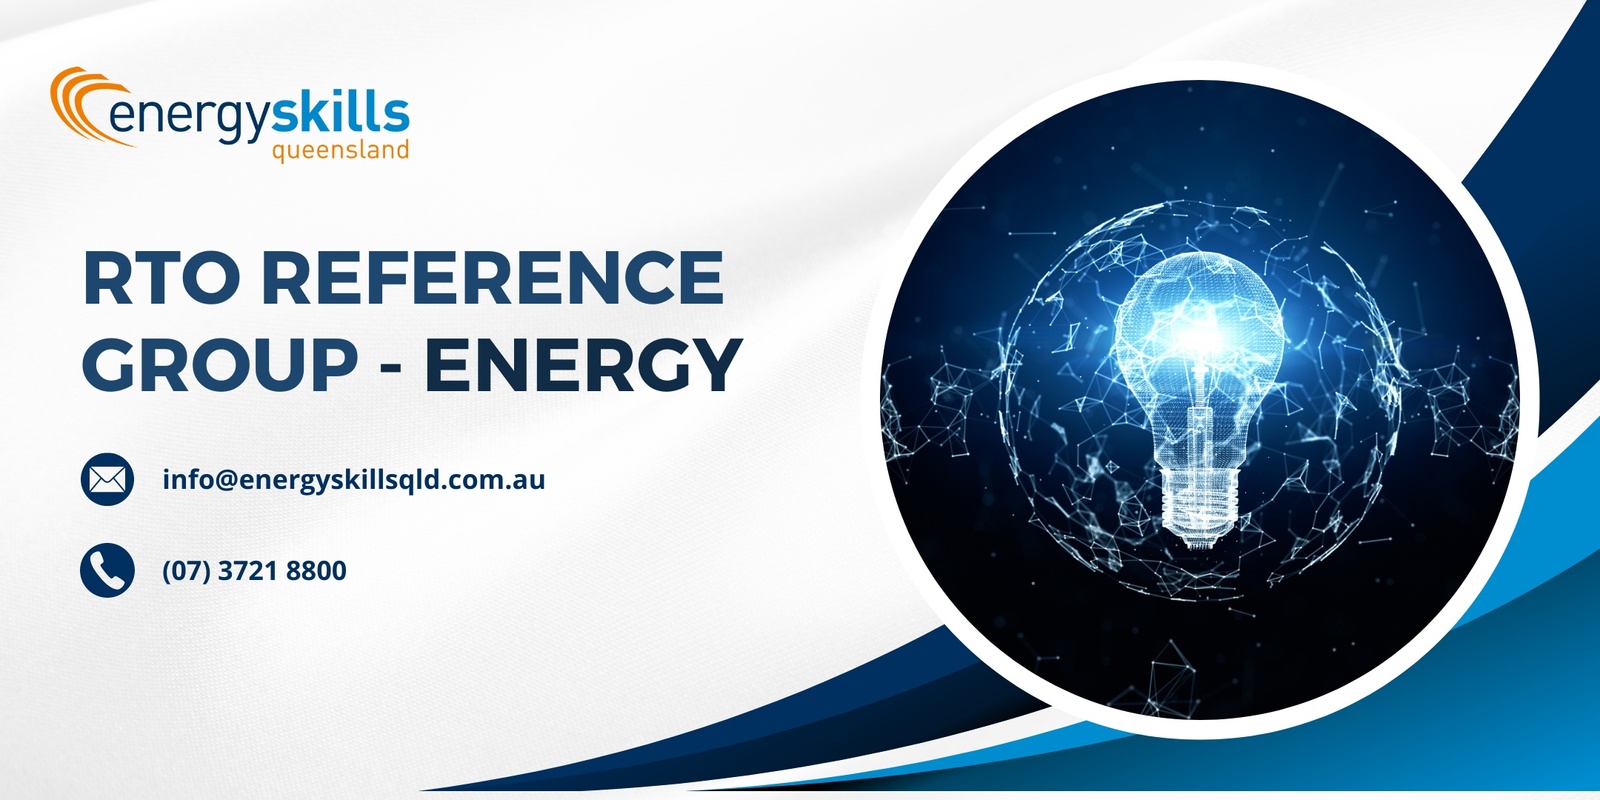 Banner image for RTO Reference Group Energy Event